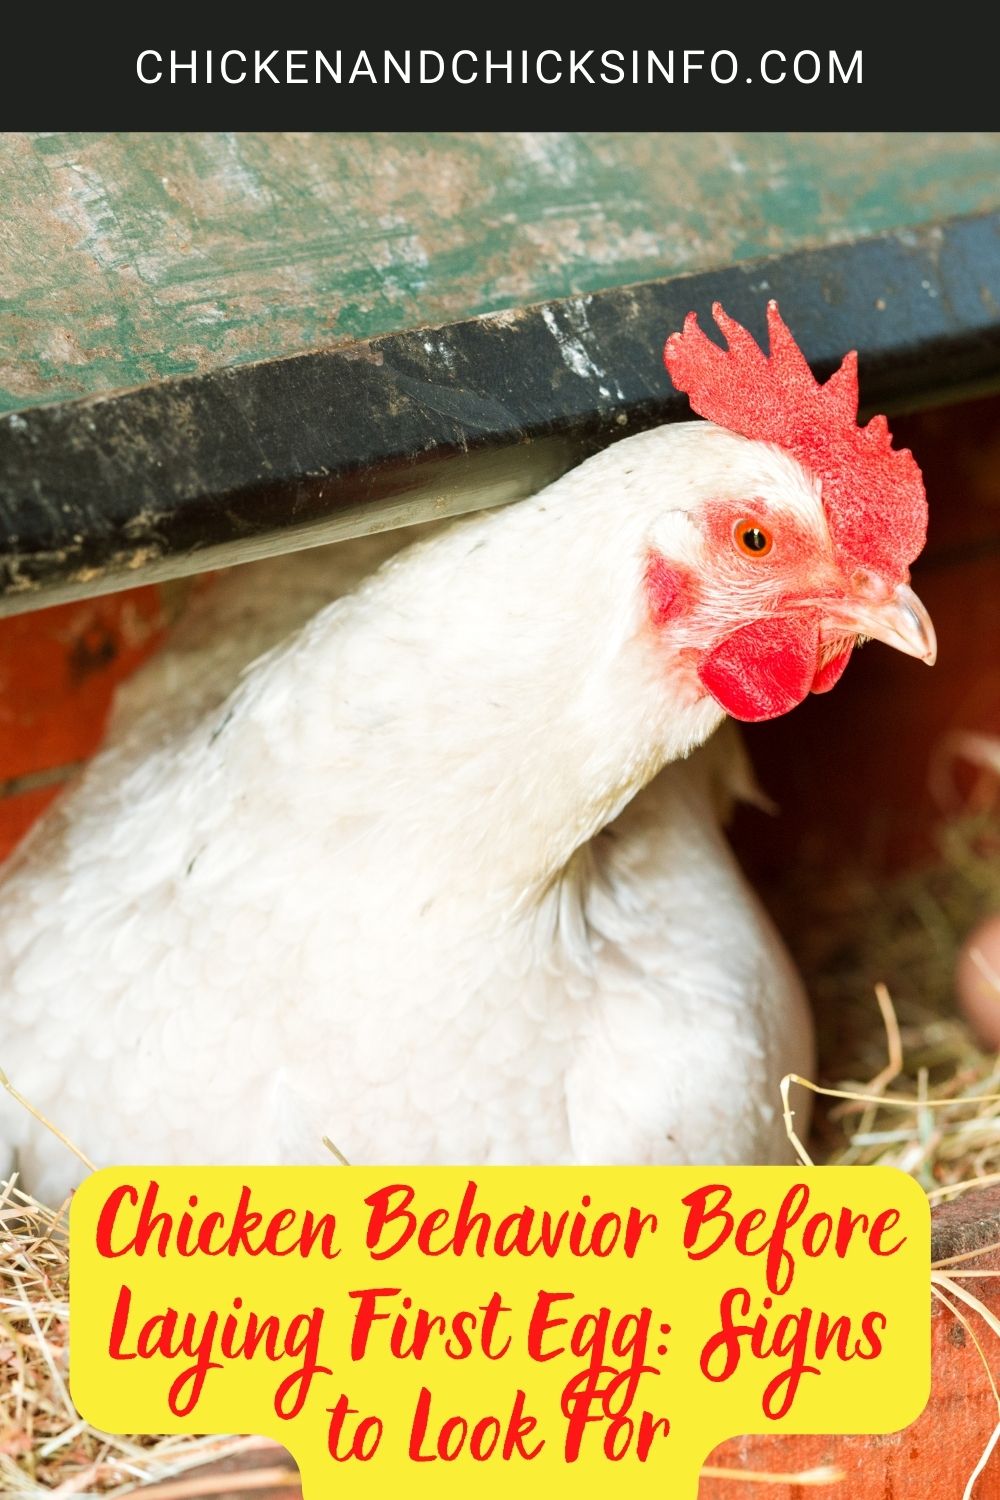 Chicken Behavior Before Laying First Egg: Signs to Look For poster.
